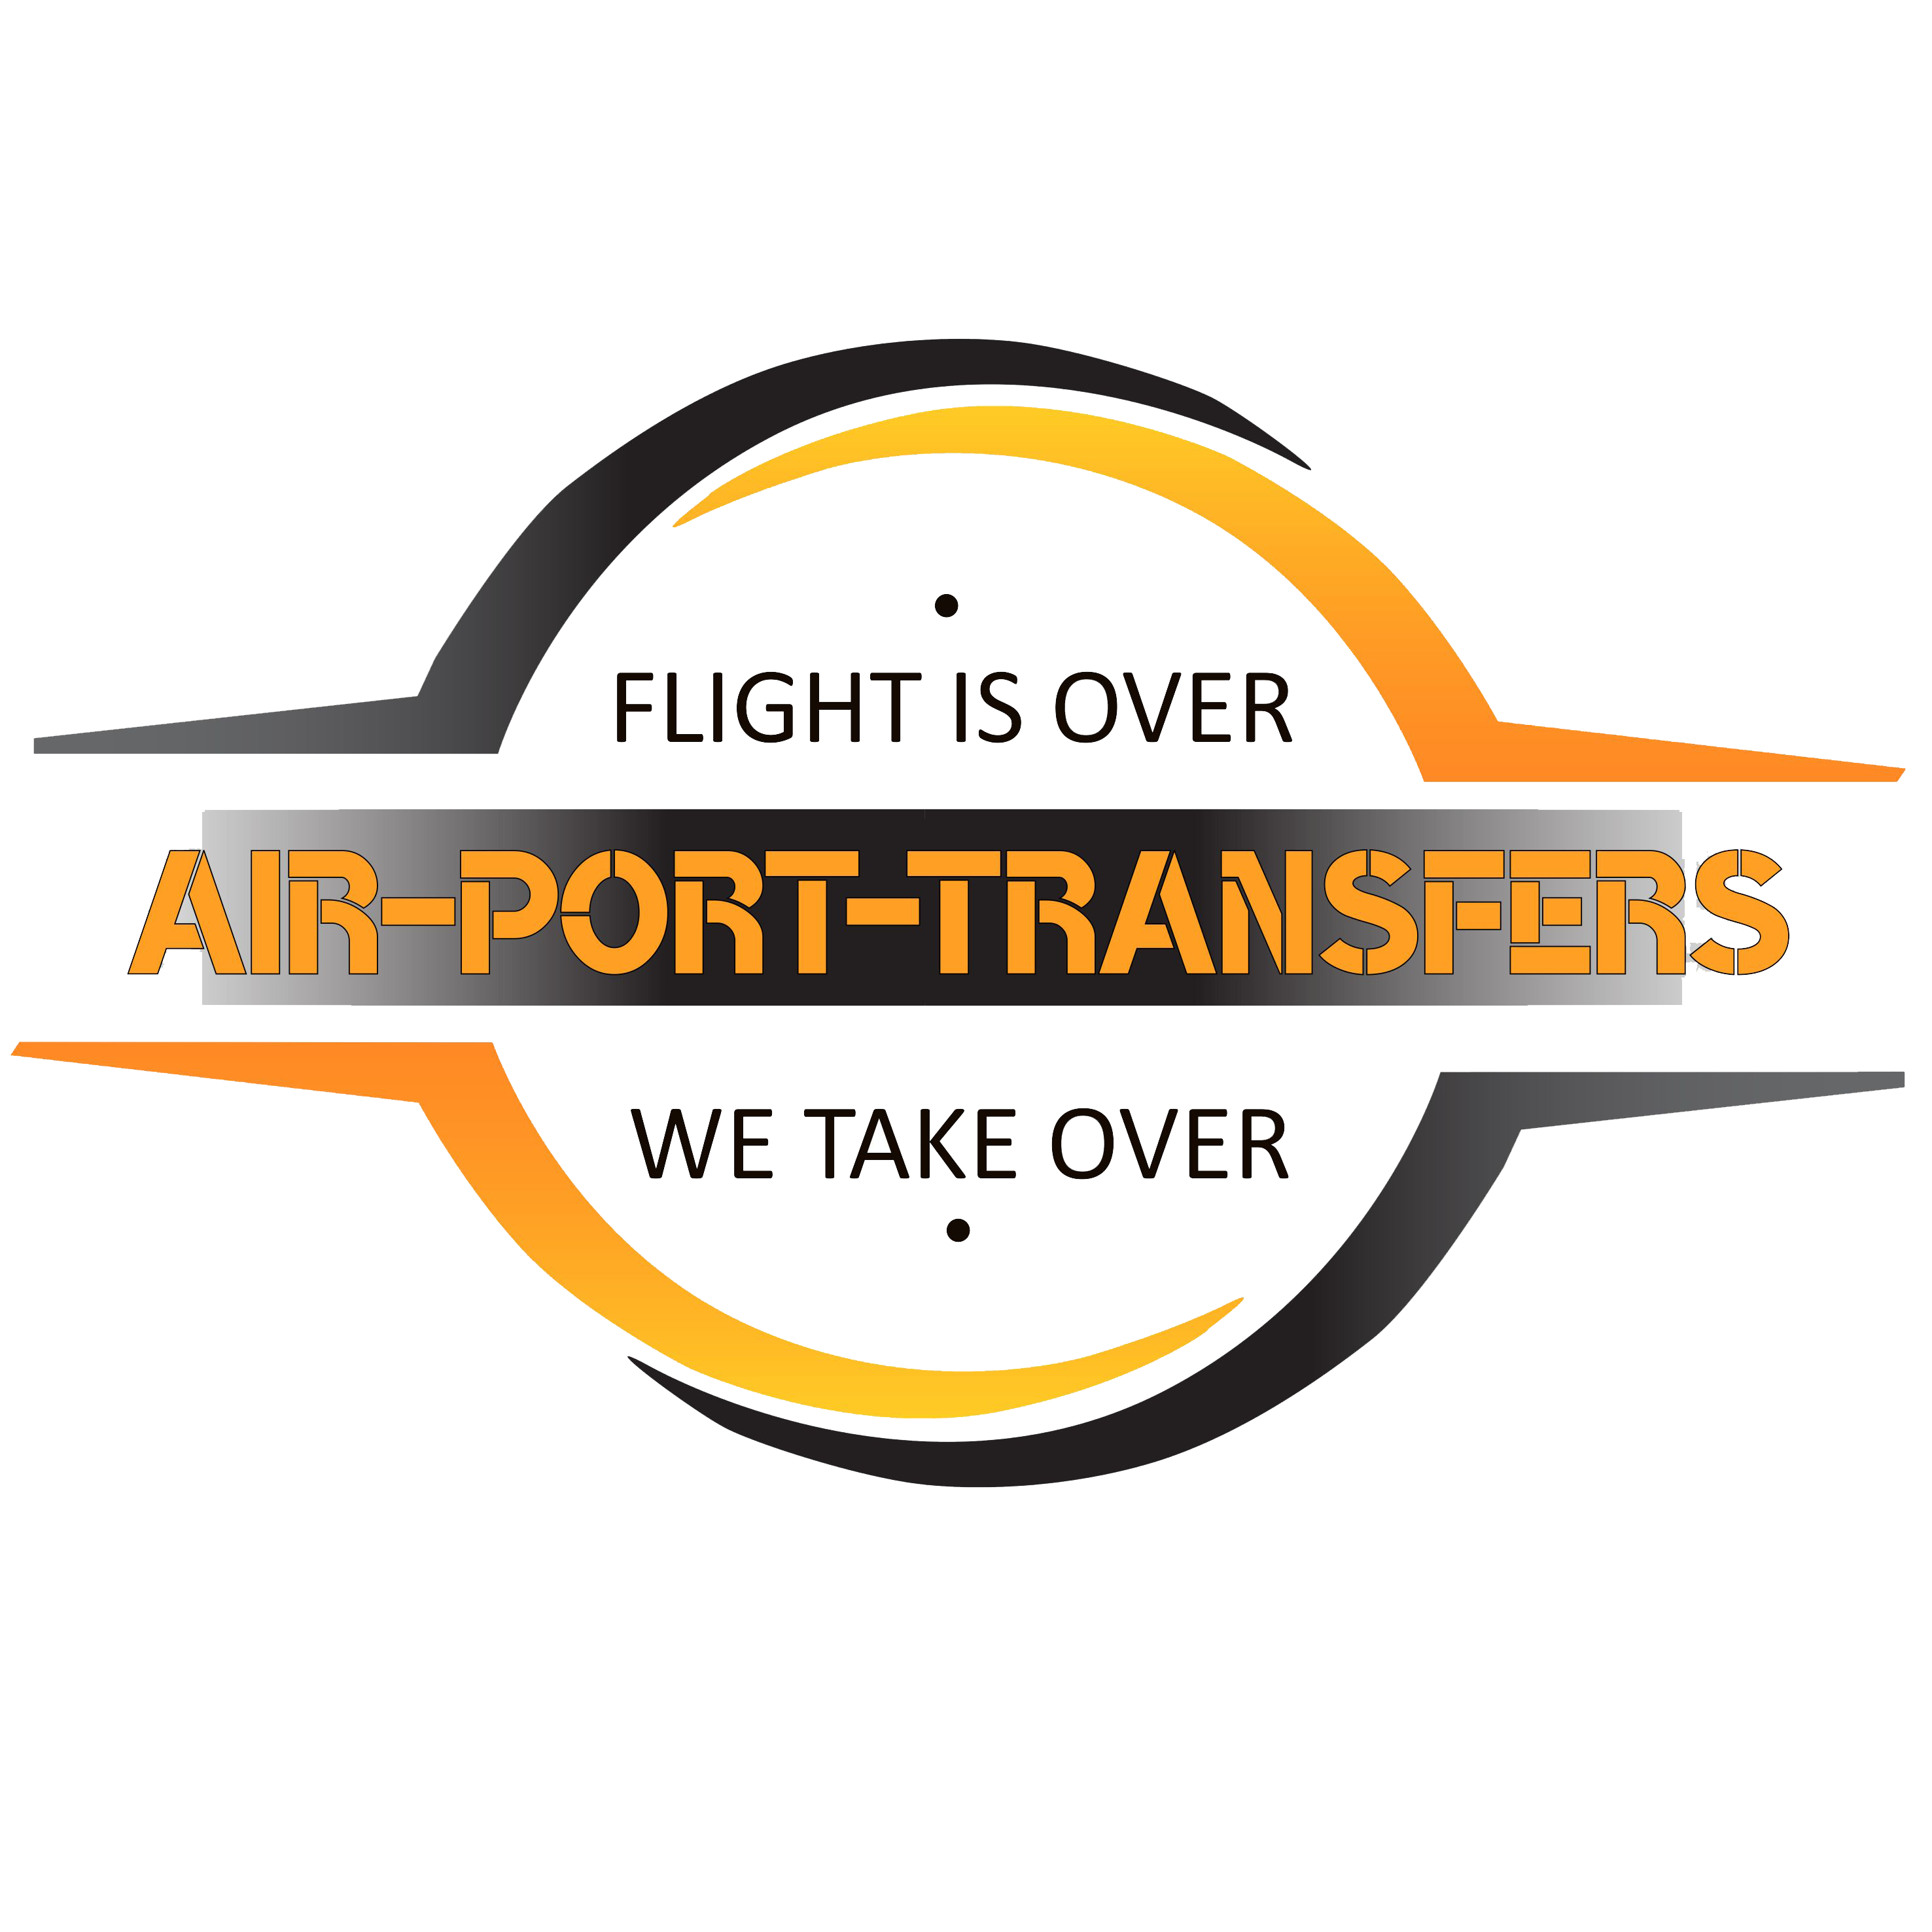 AirPort Transfers